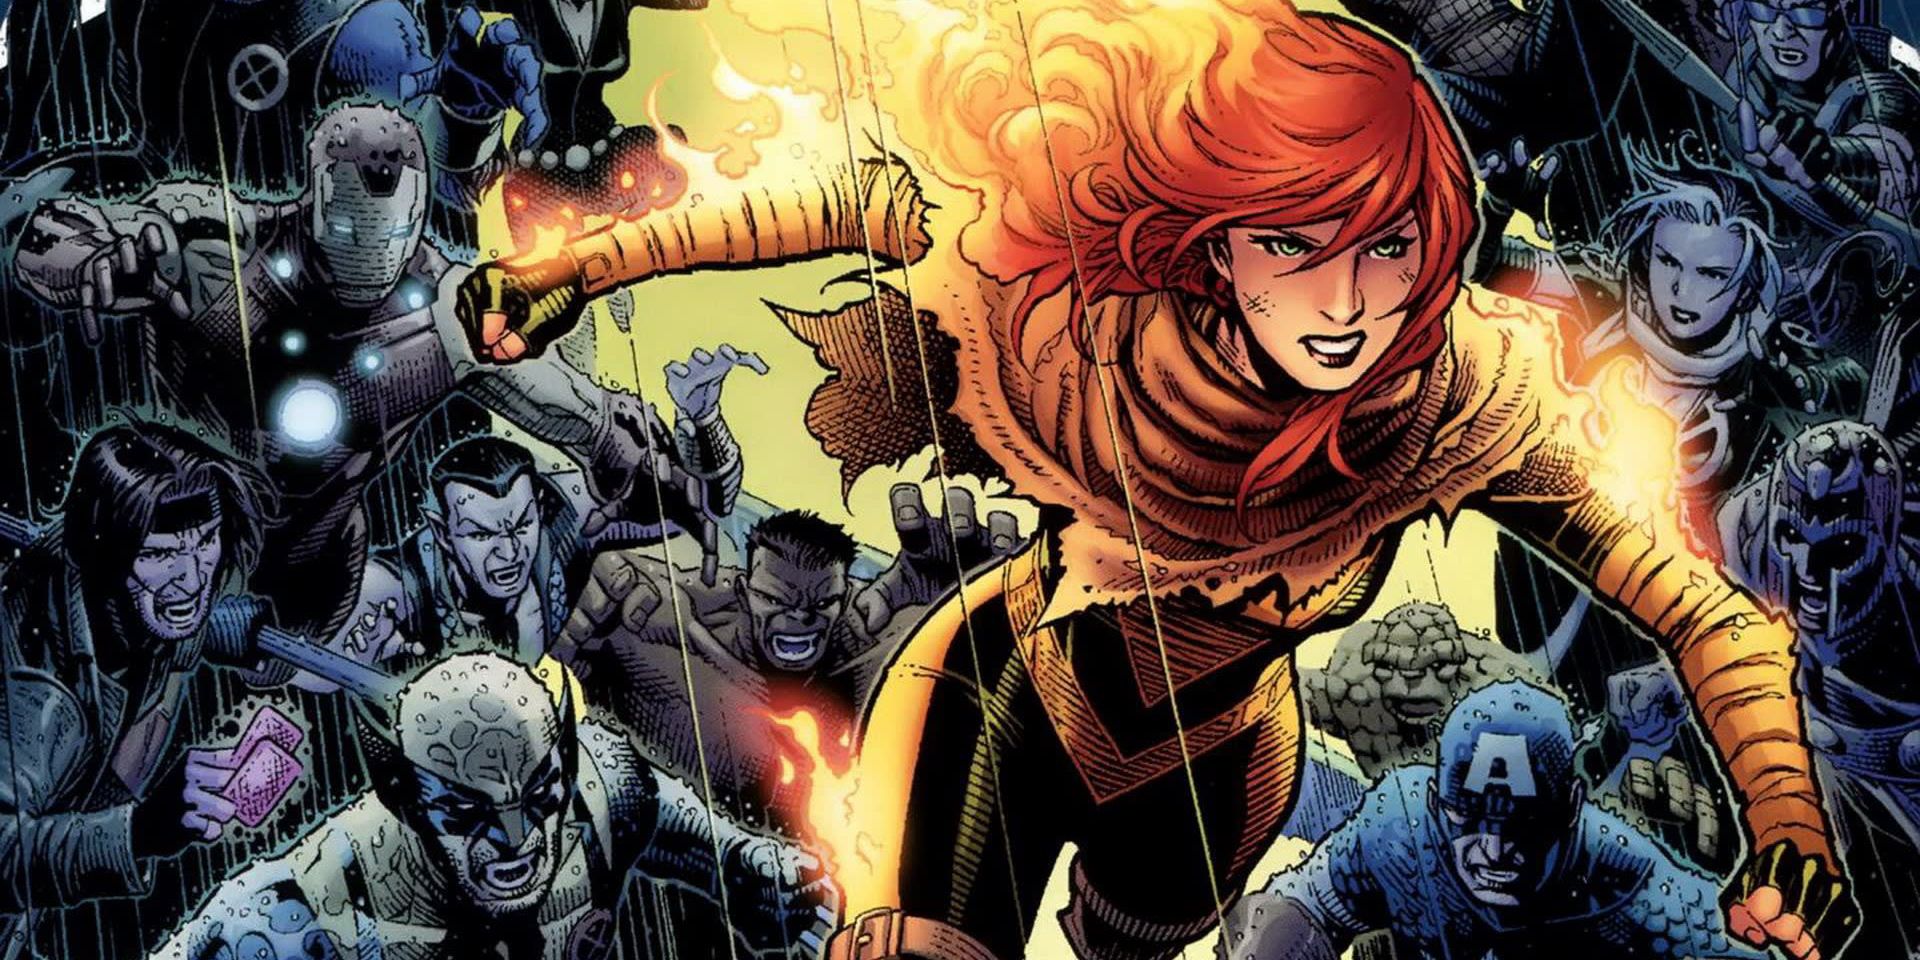 Hope Summers using her mutant ability